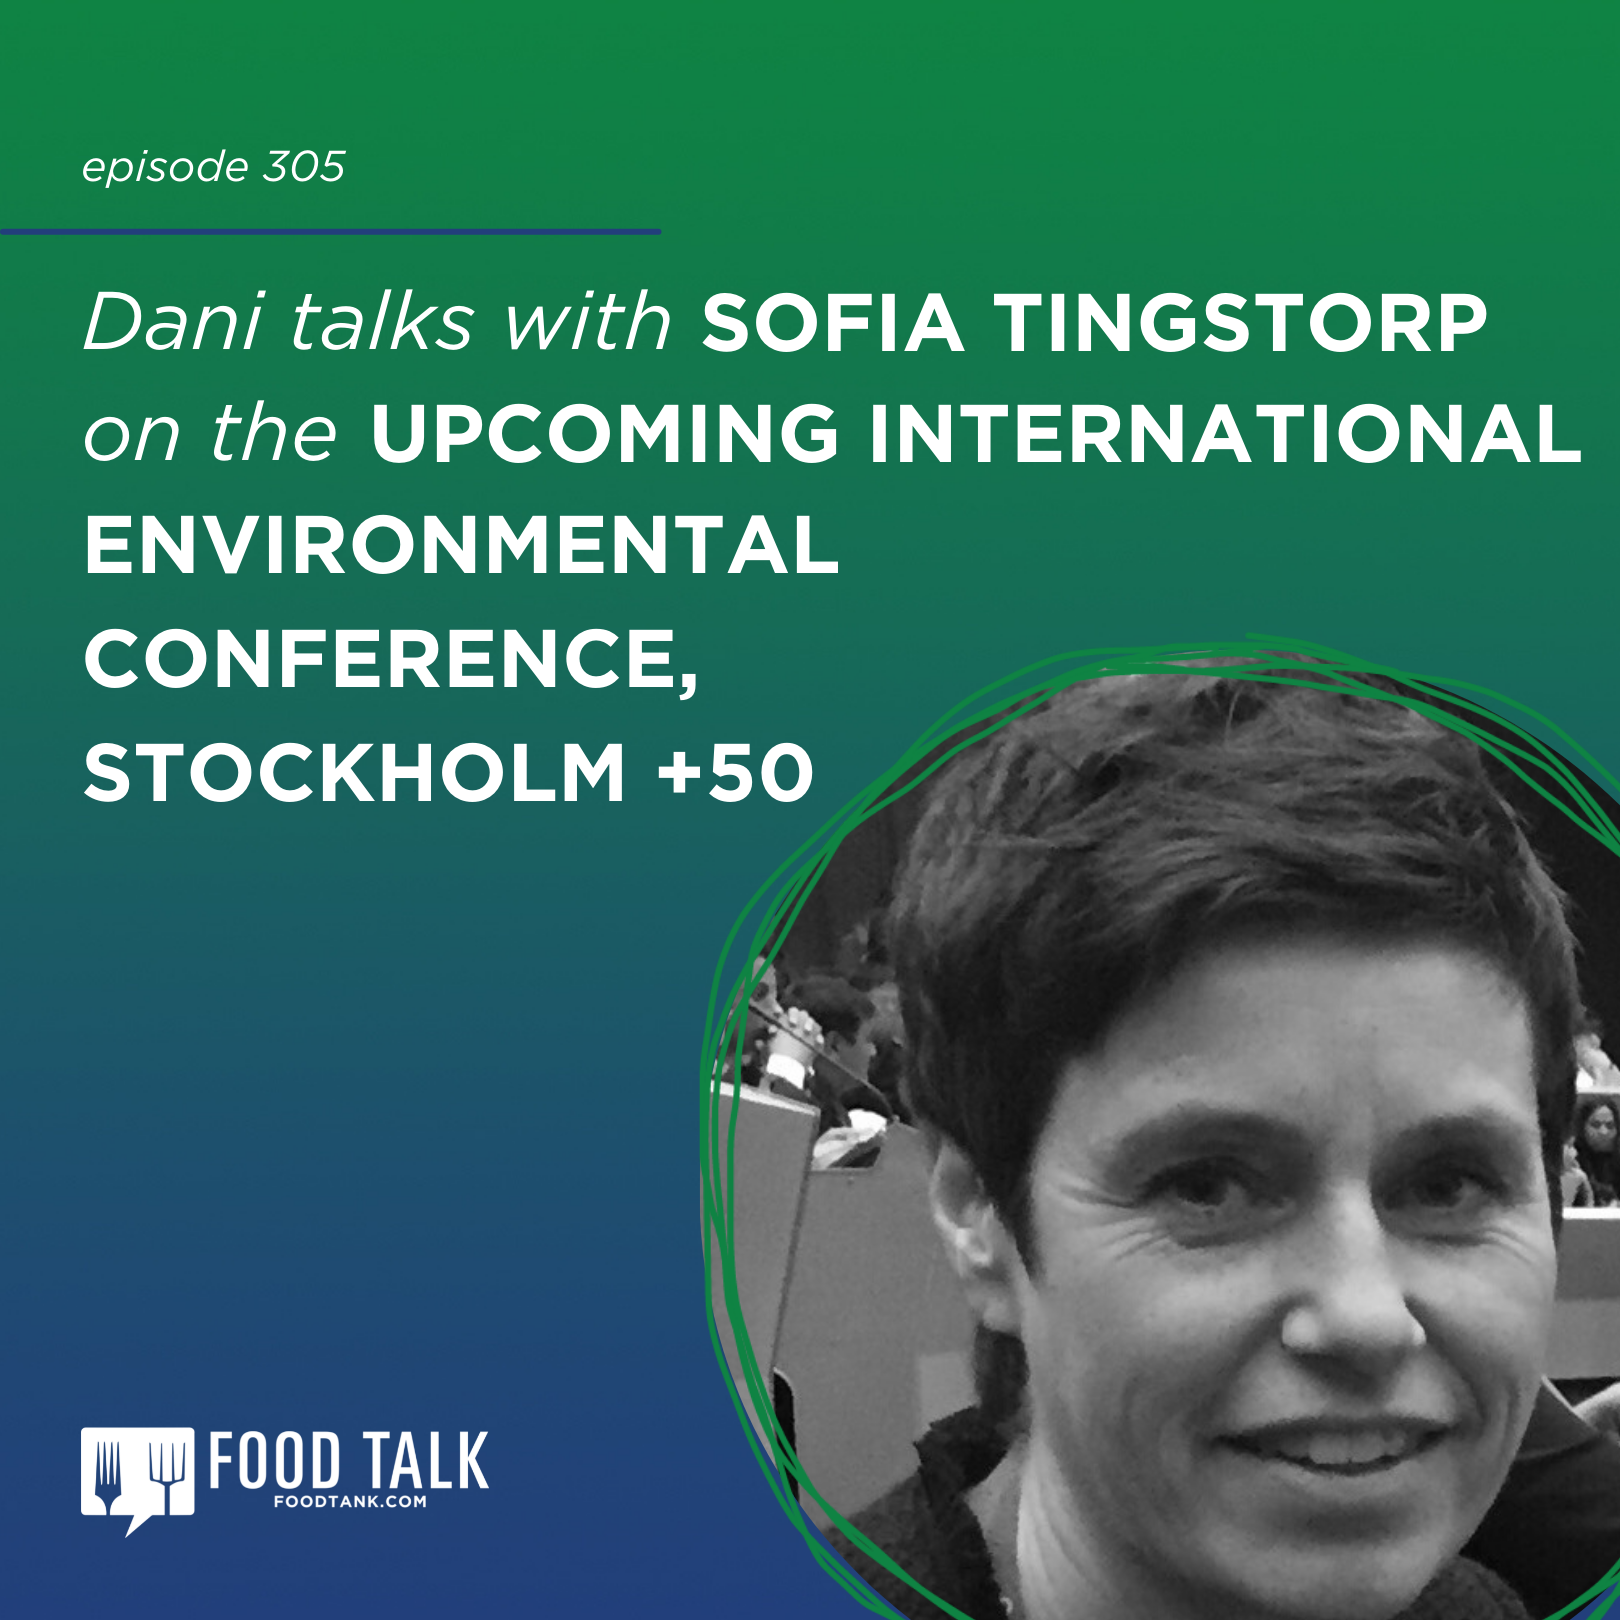 https://podcasts.apple.com/us/podcast/305-sofia-tingstorp-on-the-upcoming-international/id1434128568?i=1000552088988